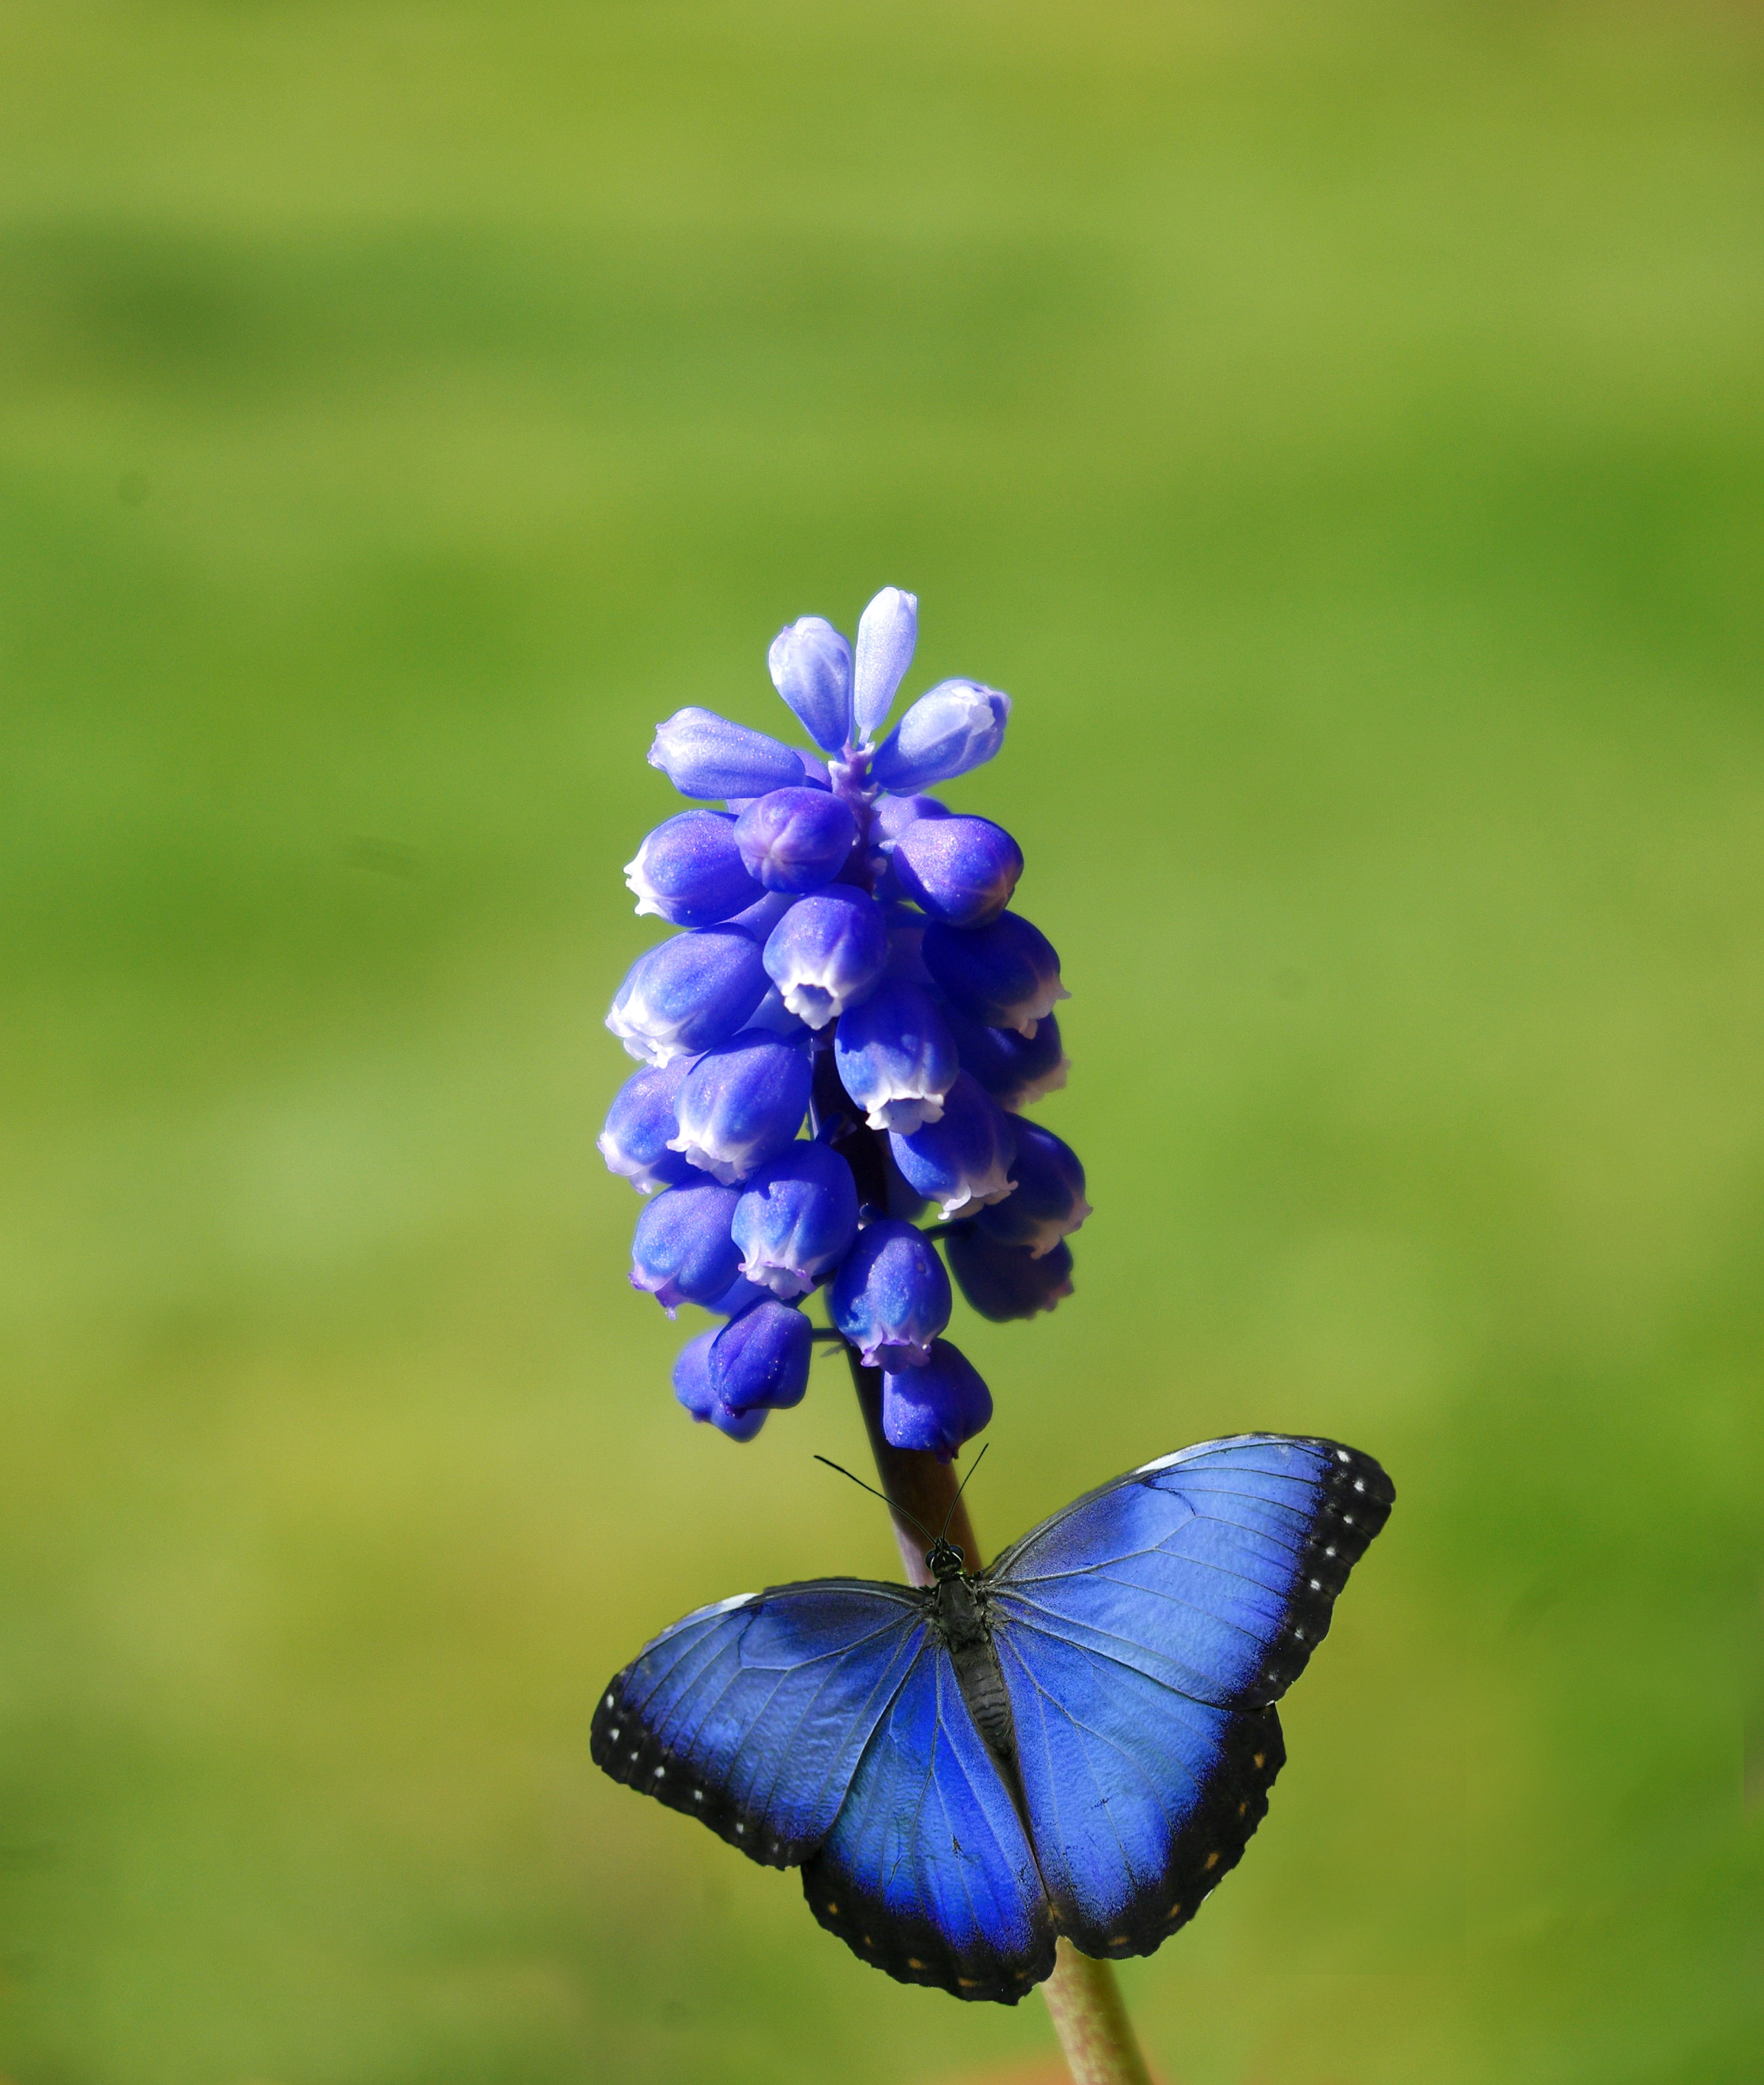 macro photo of blue morpho butterfly perched on blue flower, plant